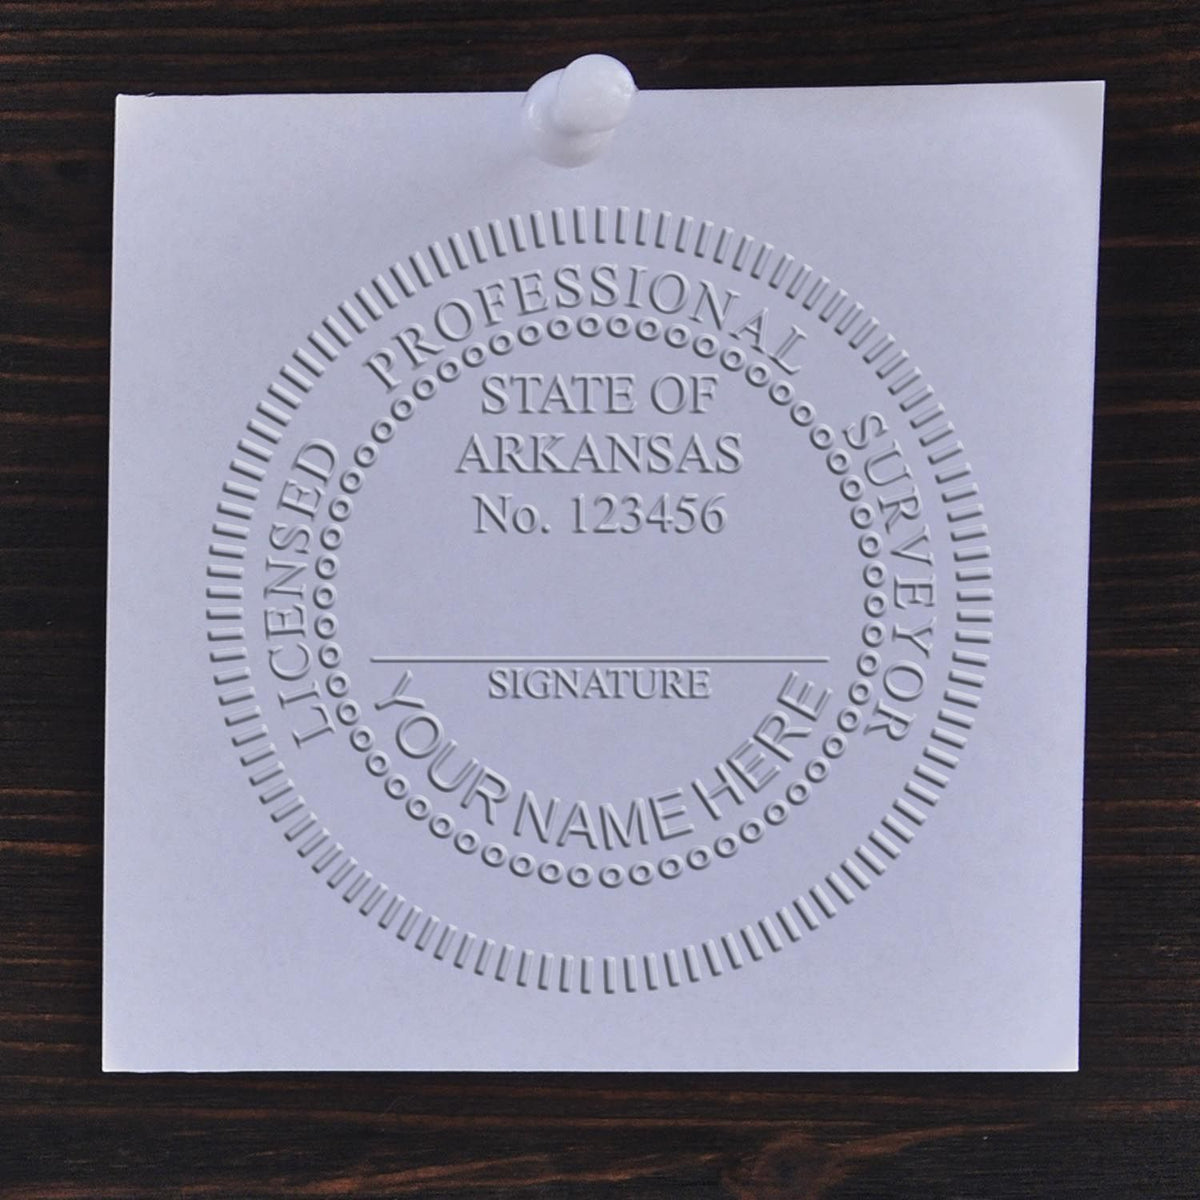 A photograph of the State of Arkansas Soft Land Surveyor Embossing Seal stamp impression reveals a vivid, professional image of the on paper.